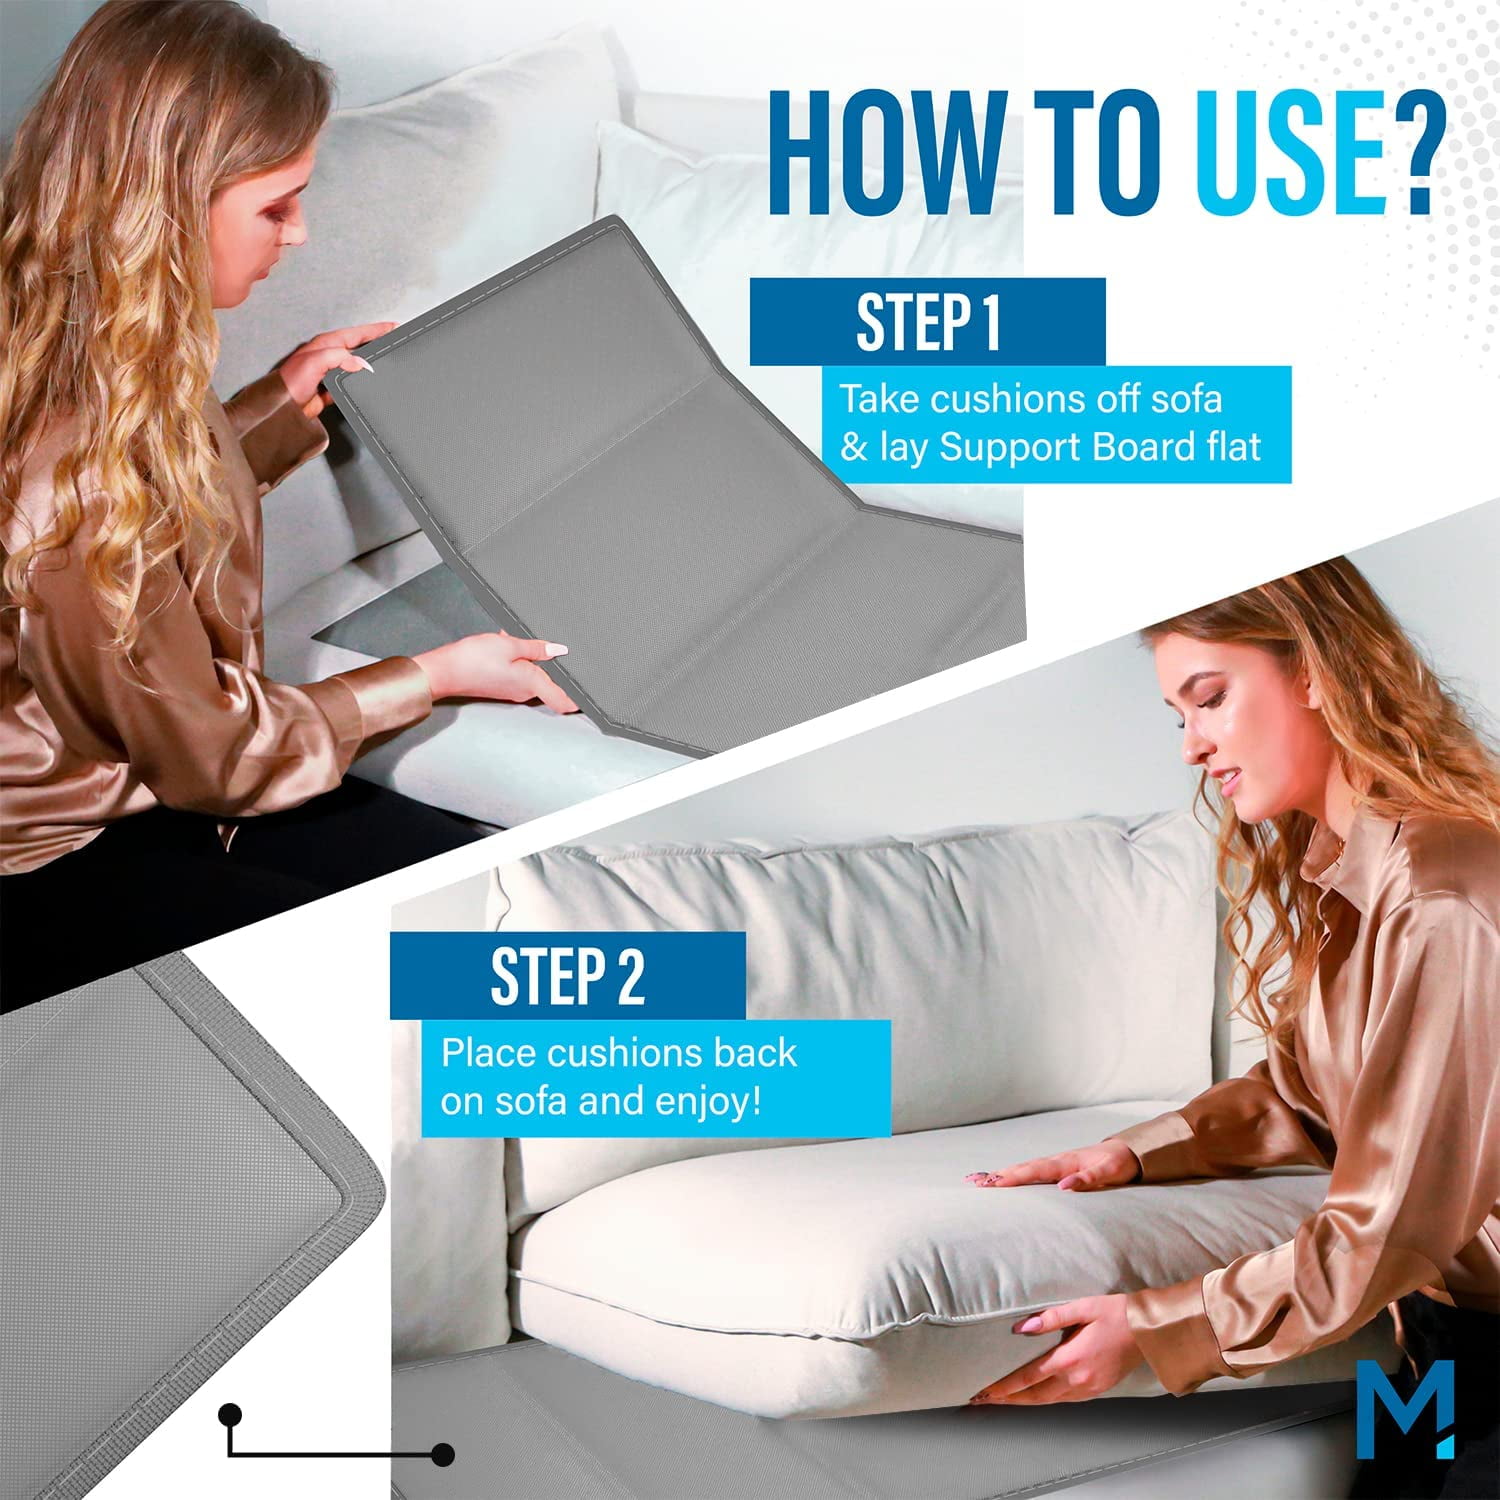 Meliusly Sofa Cushion Support Board (17x47) - Couch Supports for Sagging  Cushions, Couch Saver for Saggy Couches, Under Couch Cushion Support for  Sagging Seat - Sofa Support for Sagging Couch Insert